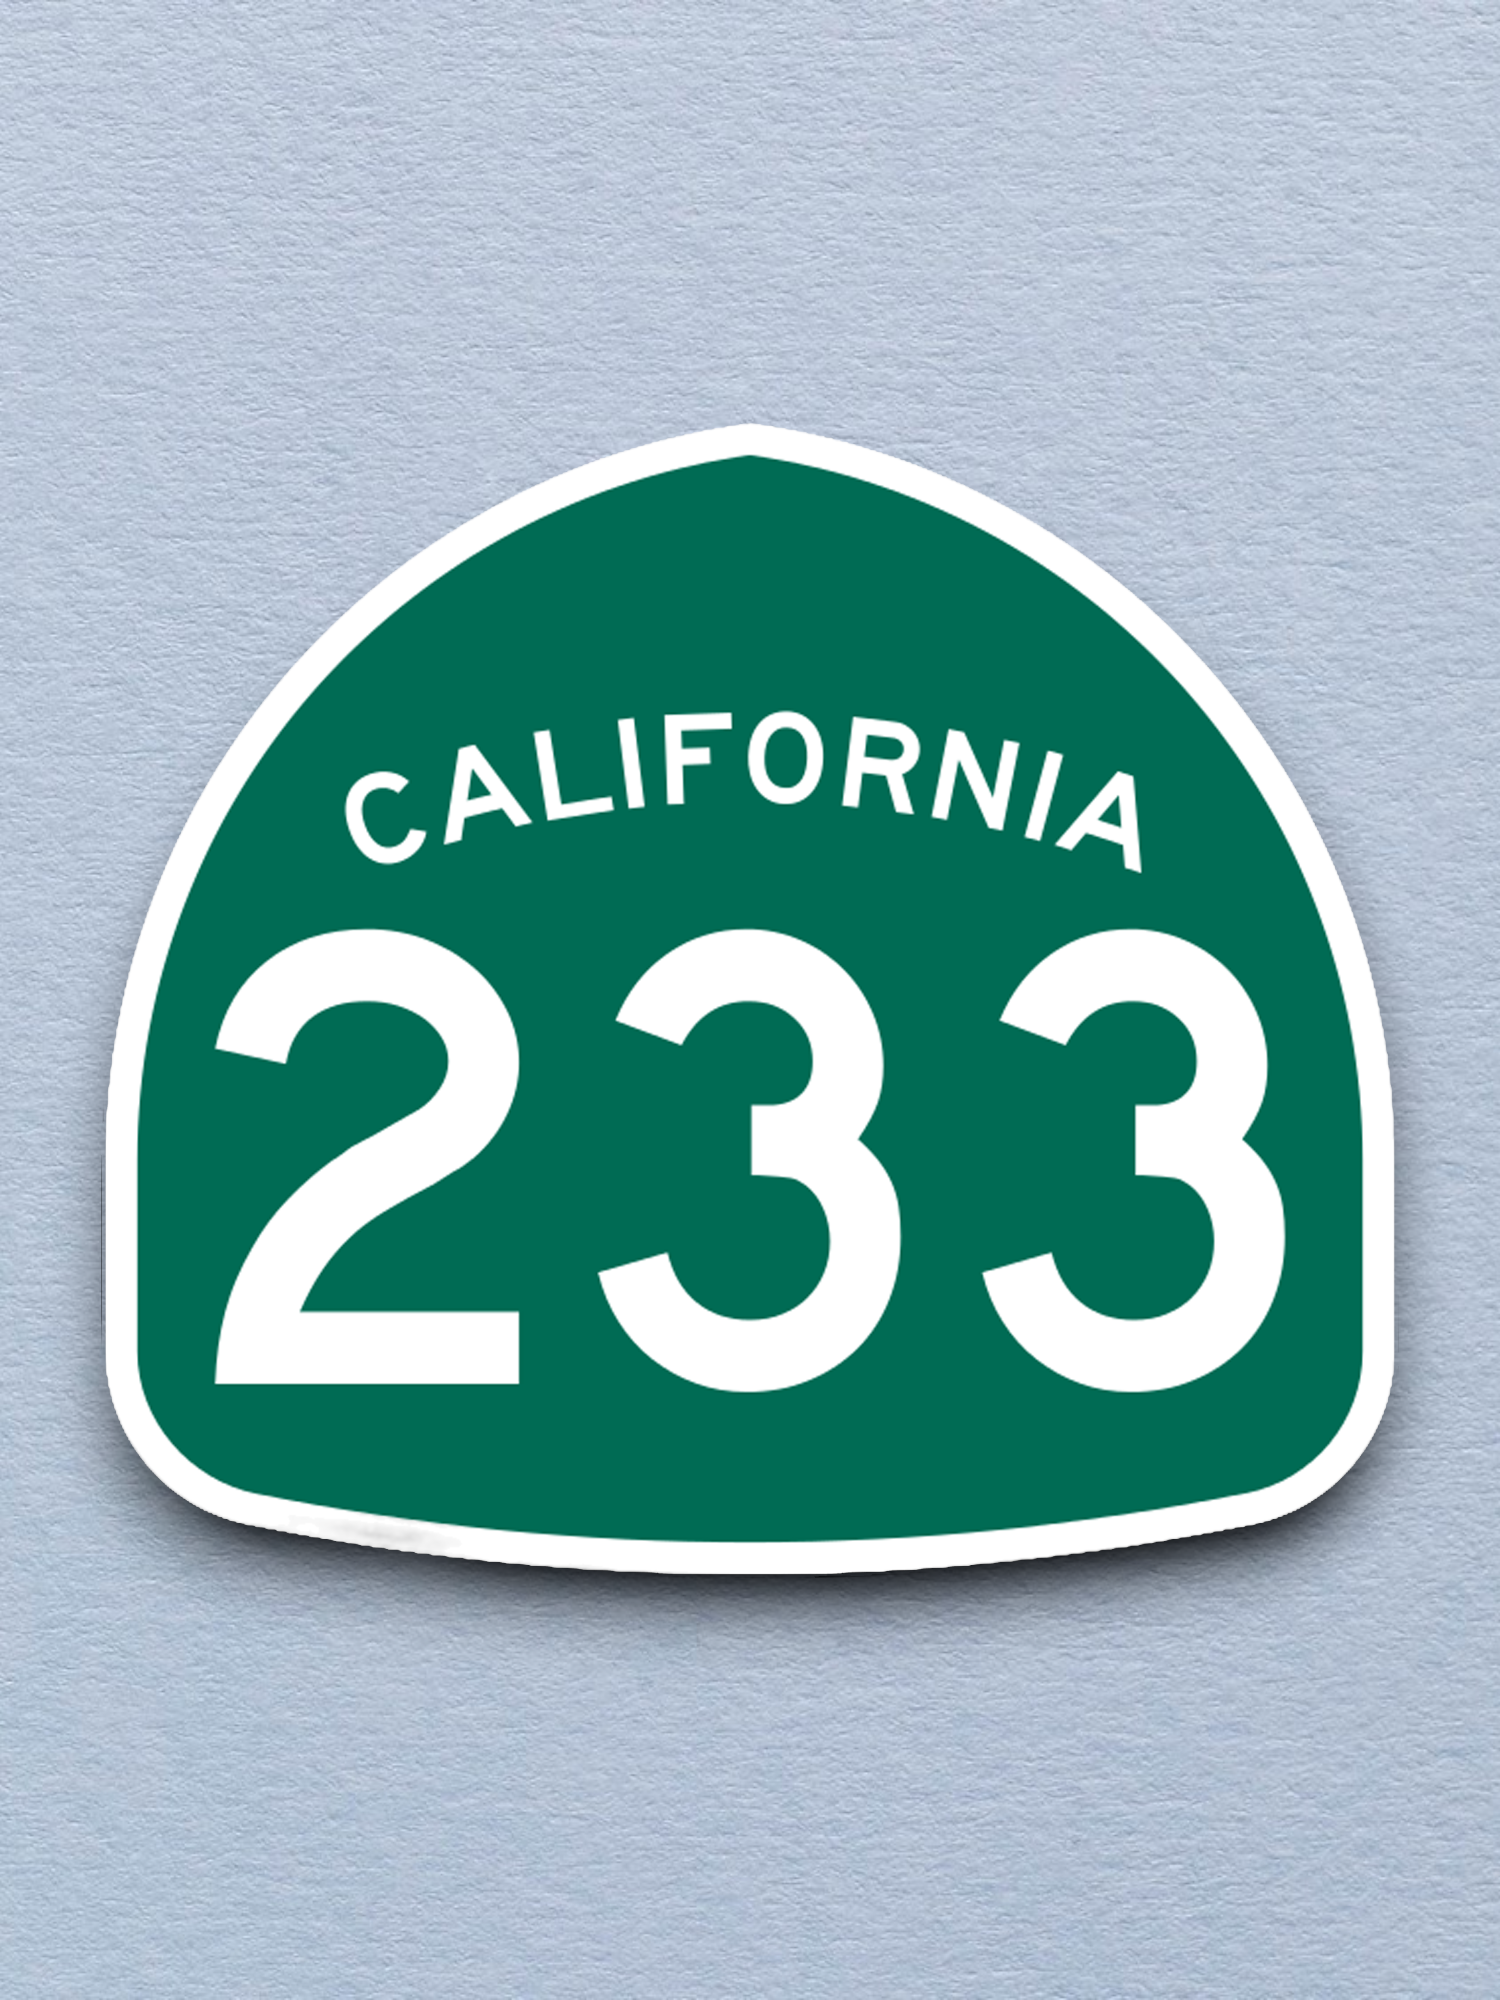 California State Route 233 Road Sign Sticker